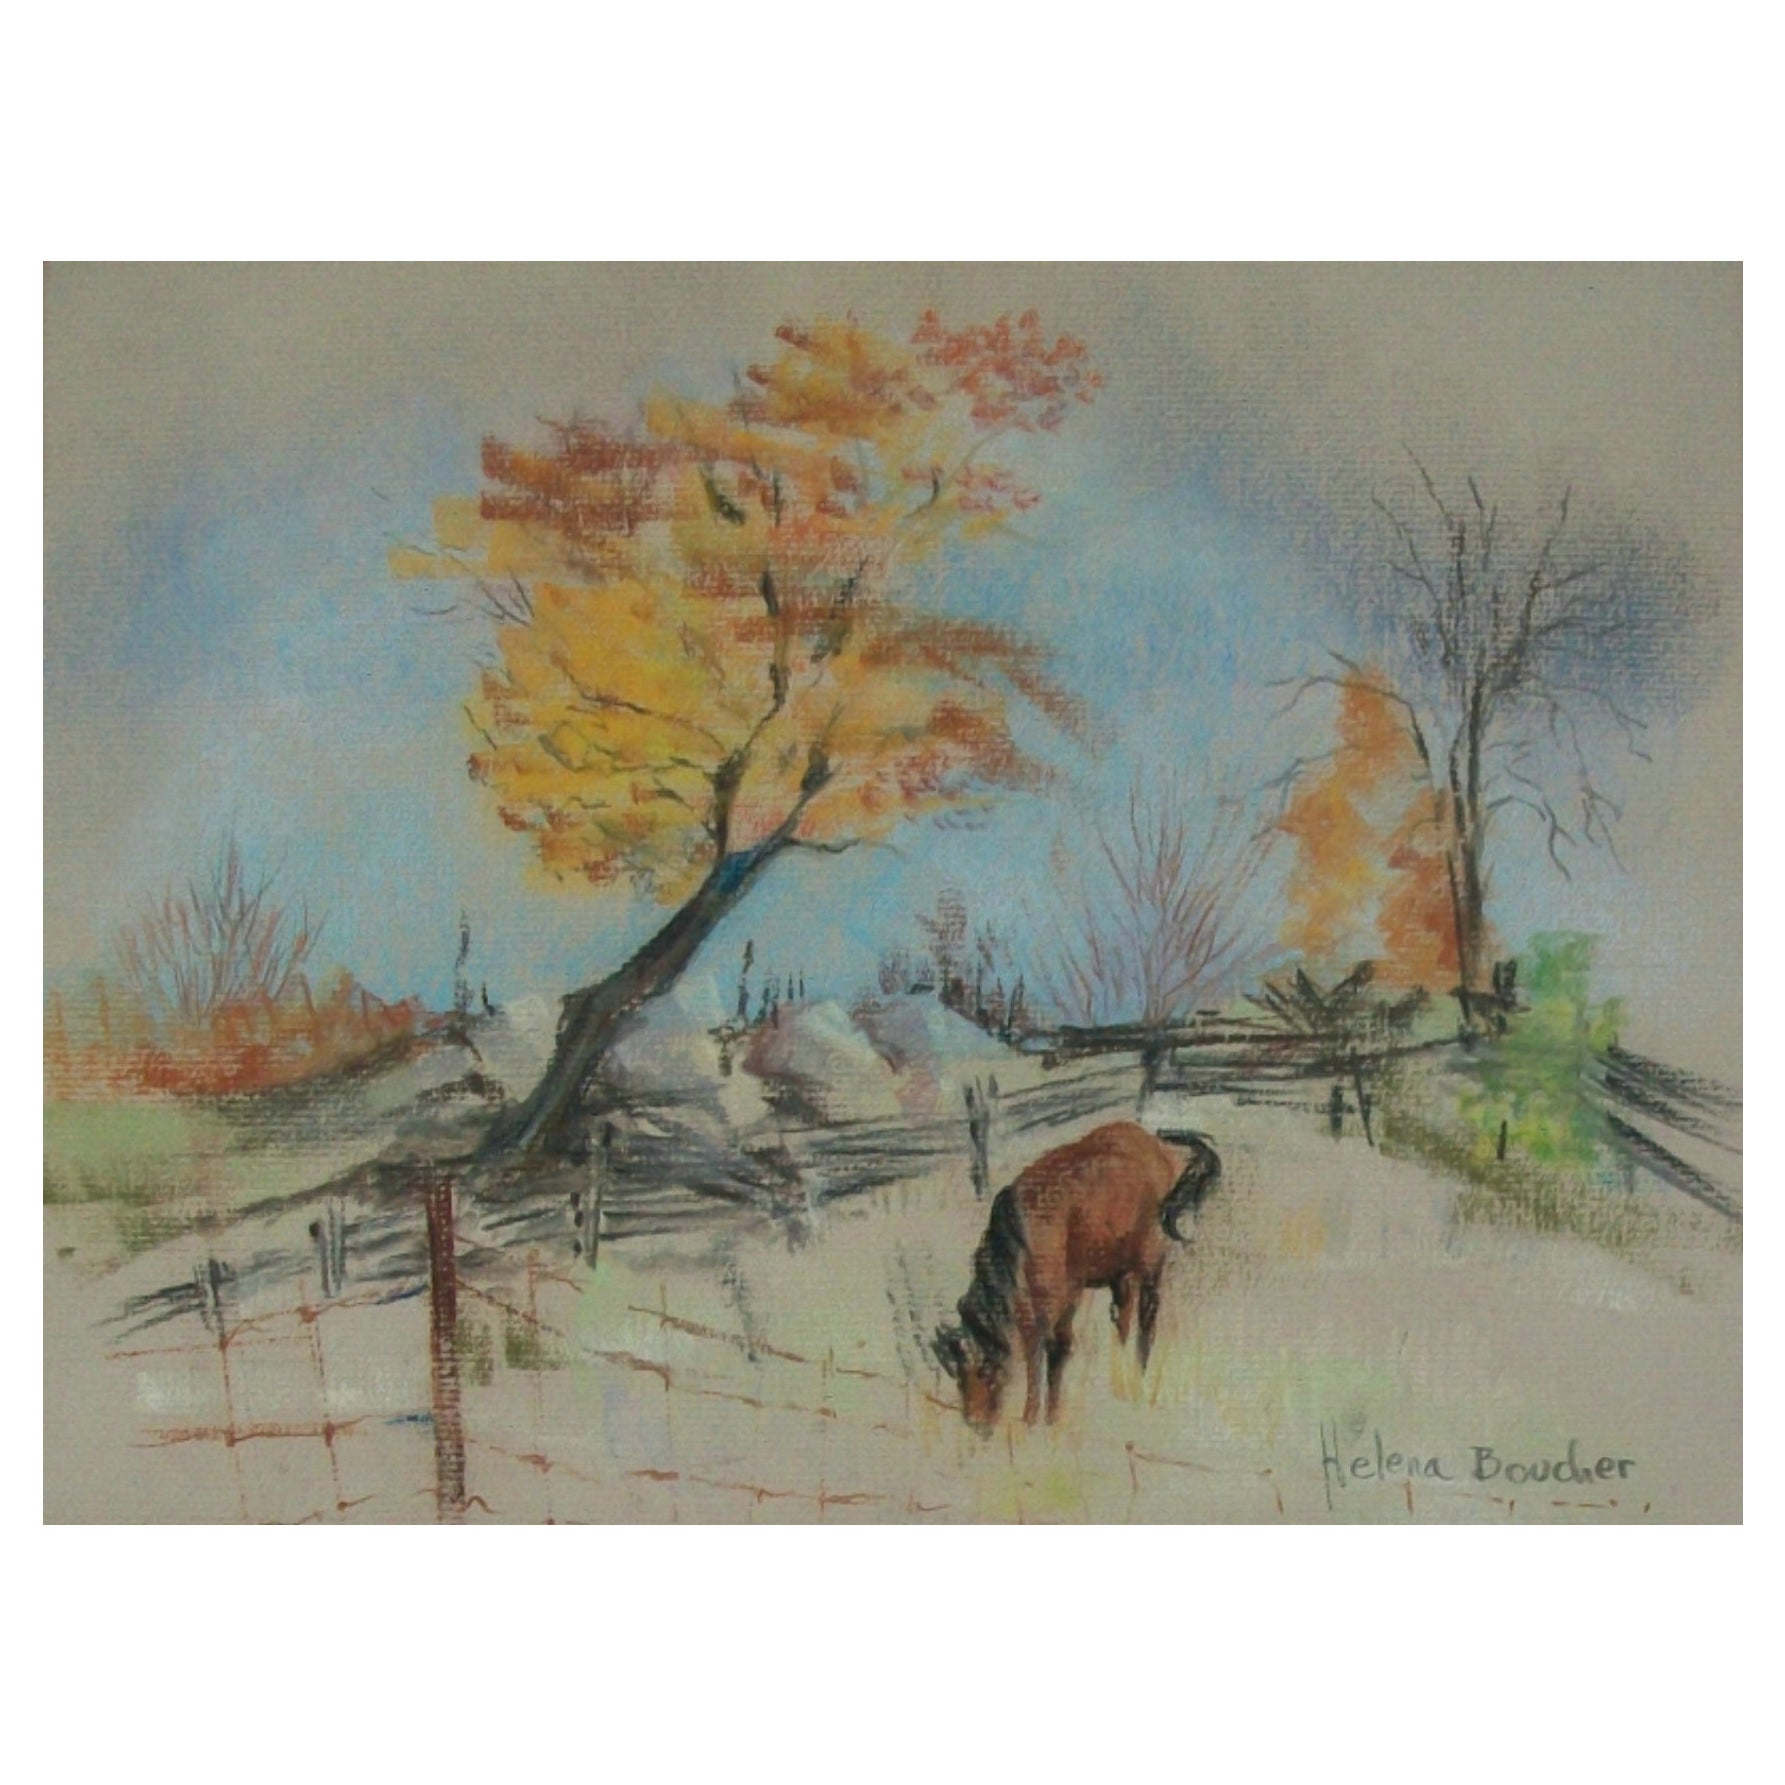 Helena Boucher - Canadian School Pastel Landscape with Horse - Mid 20th Century